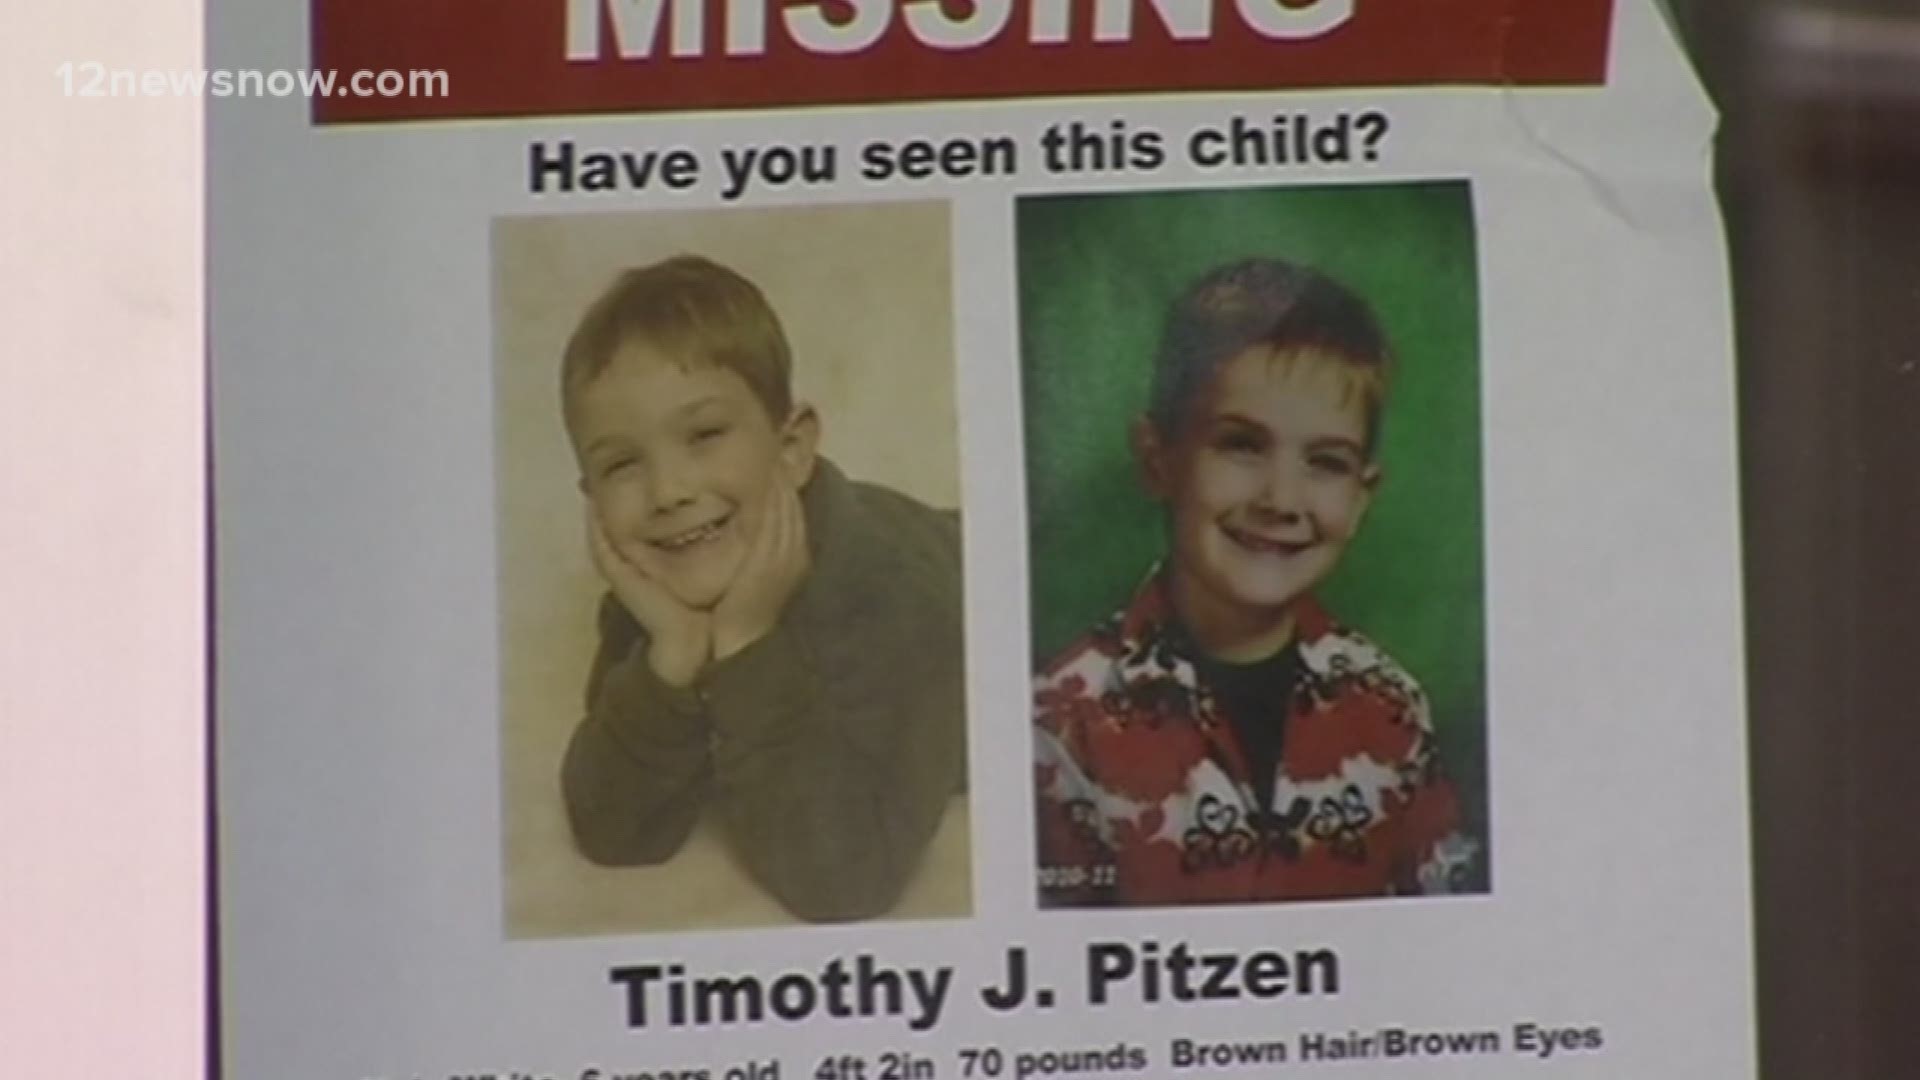 The FBI has confirmed after DNA tests that the person claiming to be Timothy Pitzen, an Illinois boy who went missing at the age of six in 2011, is a fake. The person making the claim is actually a 23-year-old male, Brian Rini.